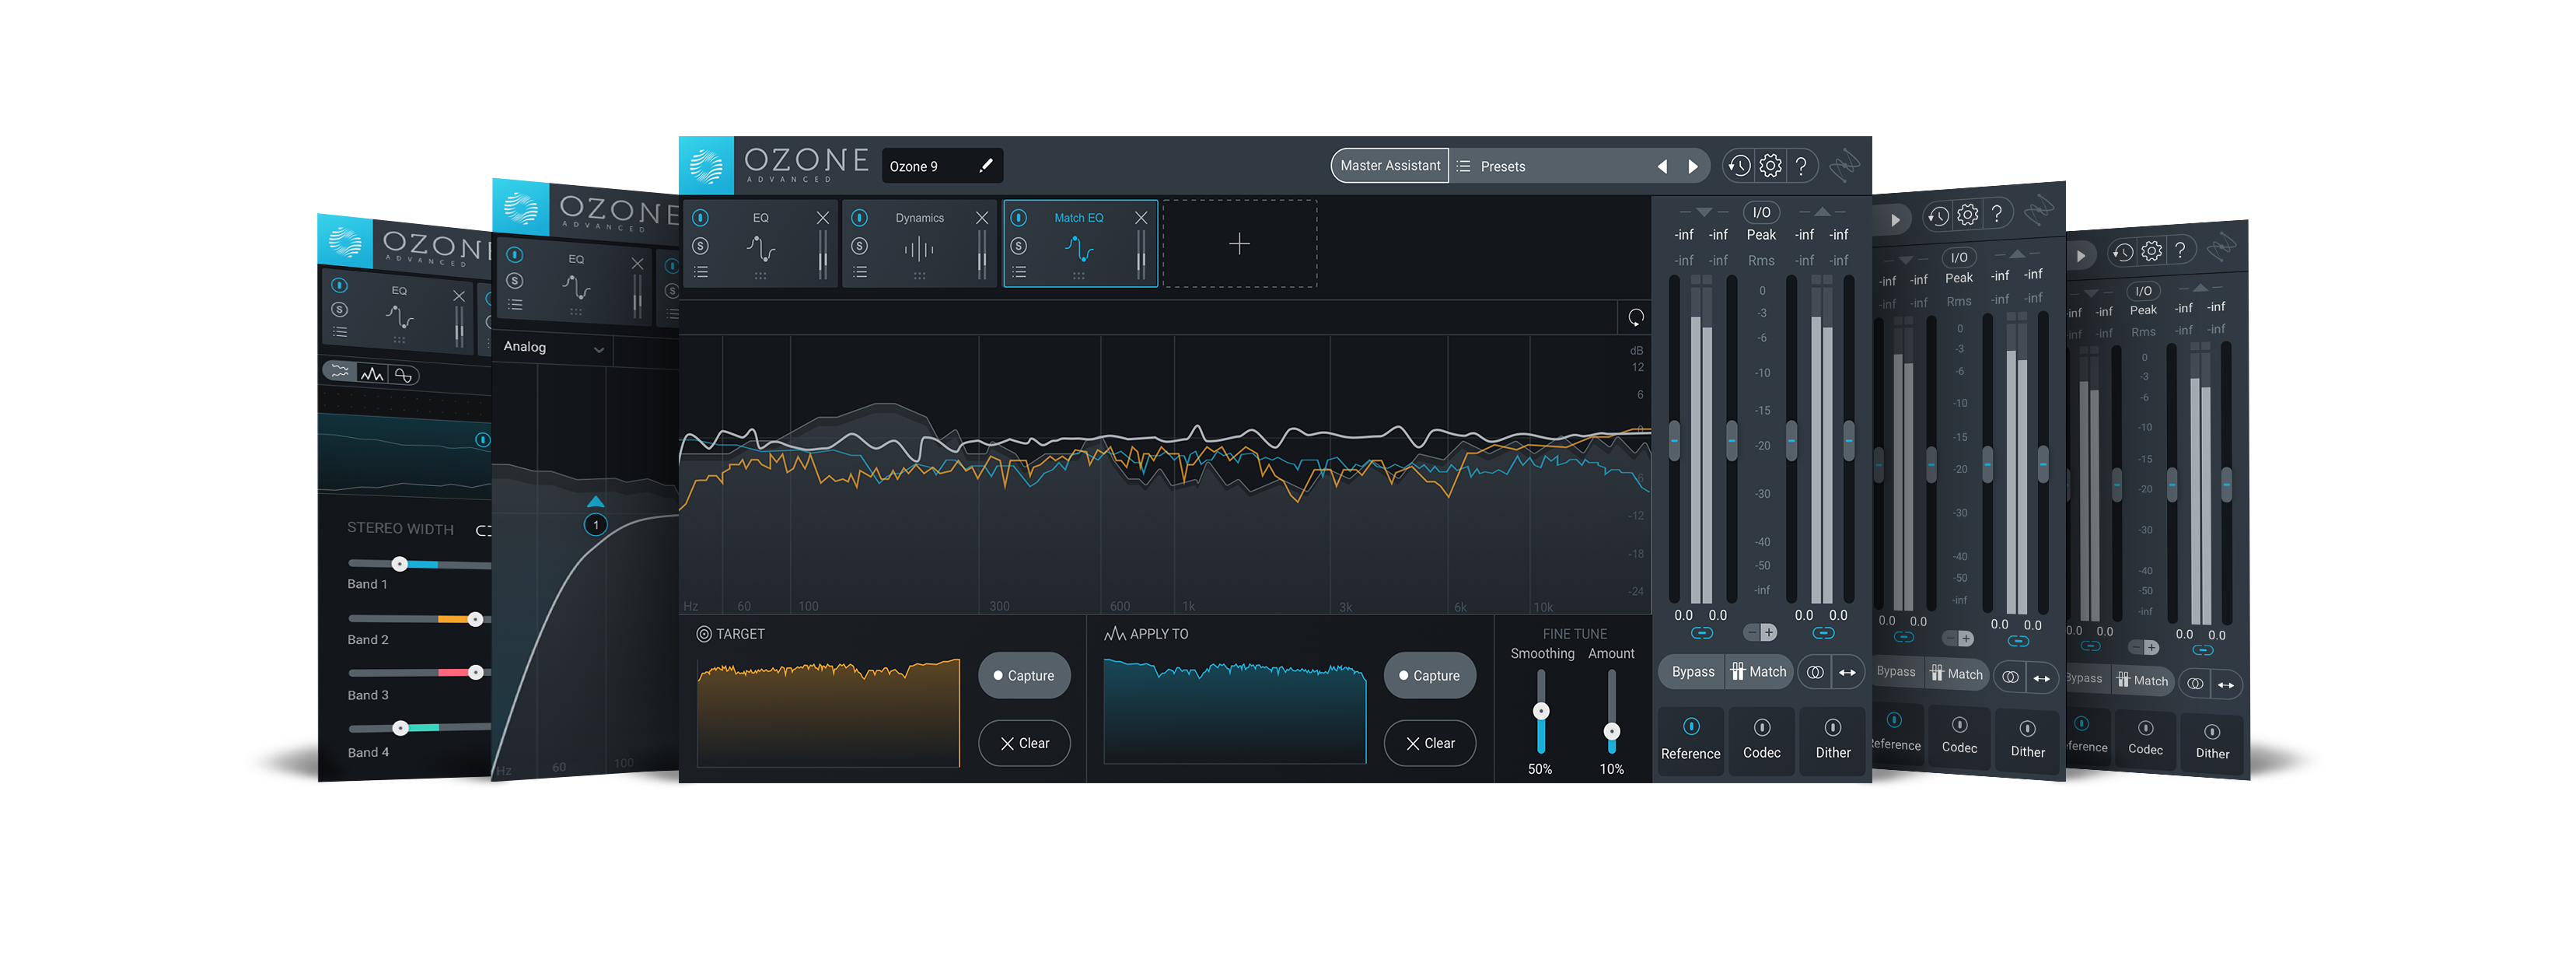 iZotope Music Production Suite Crossgrade from Tonal Balance Control 2